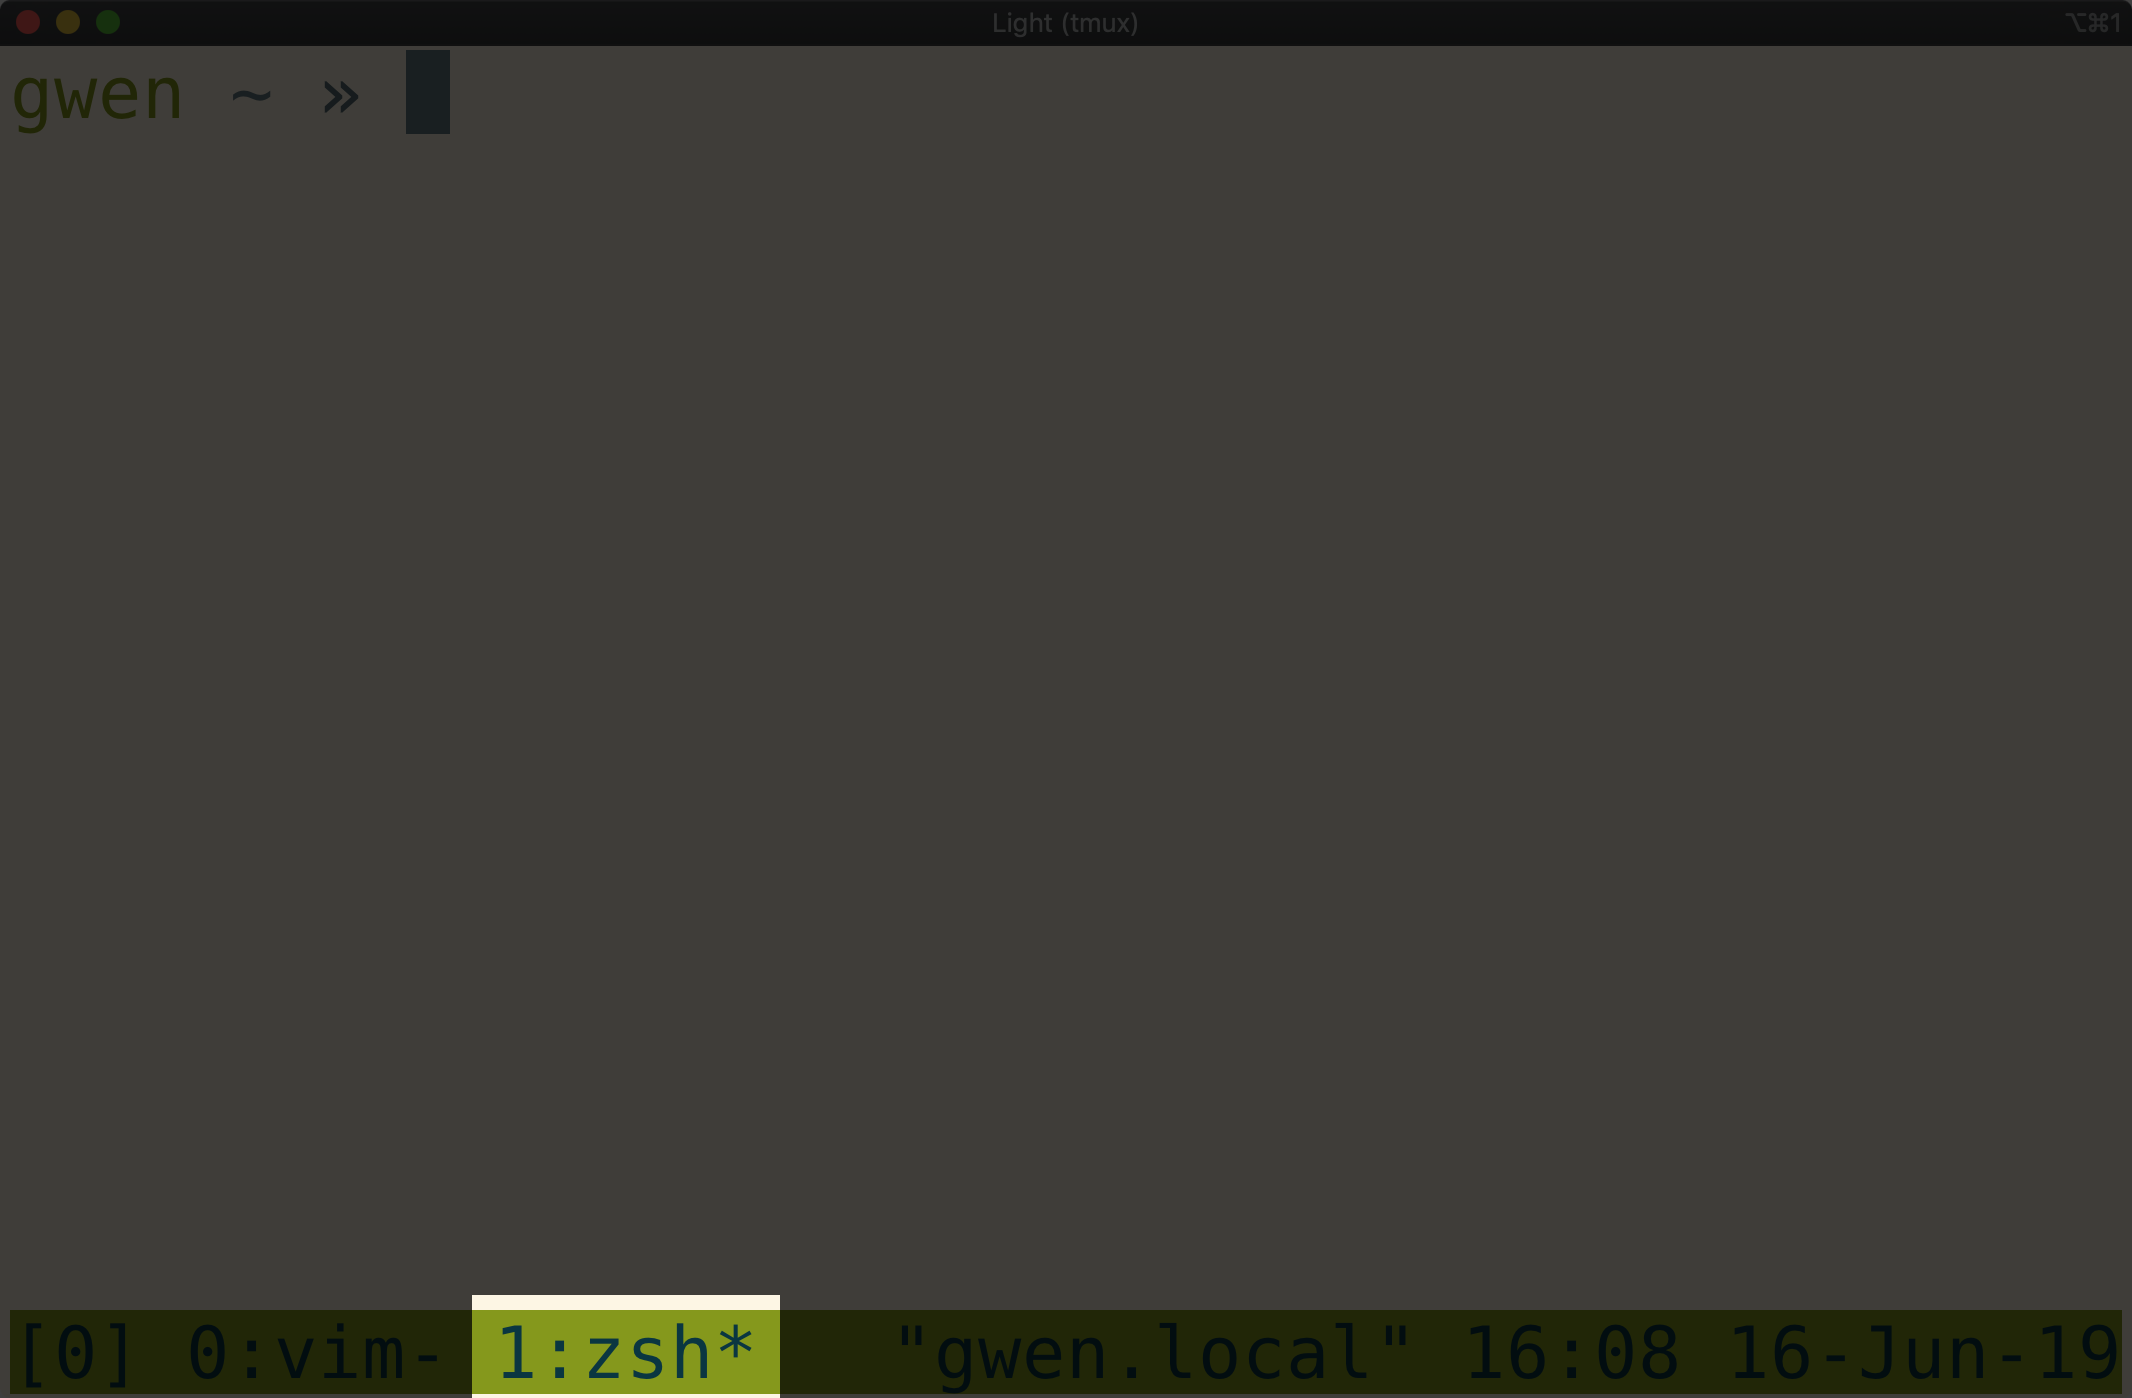 Tmux window with the new window in the status bar highlighted